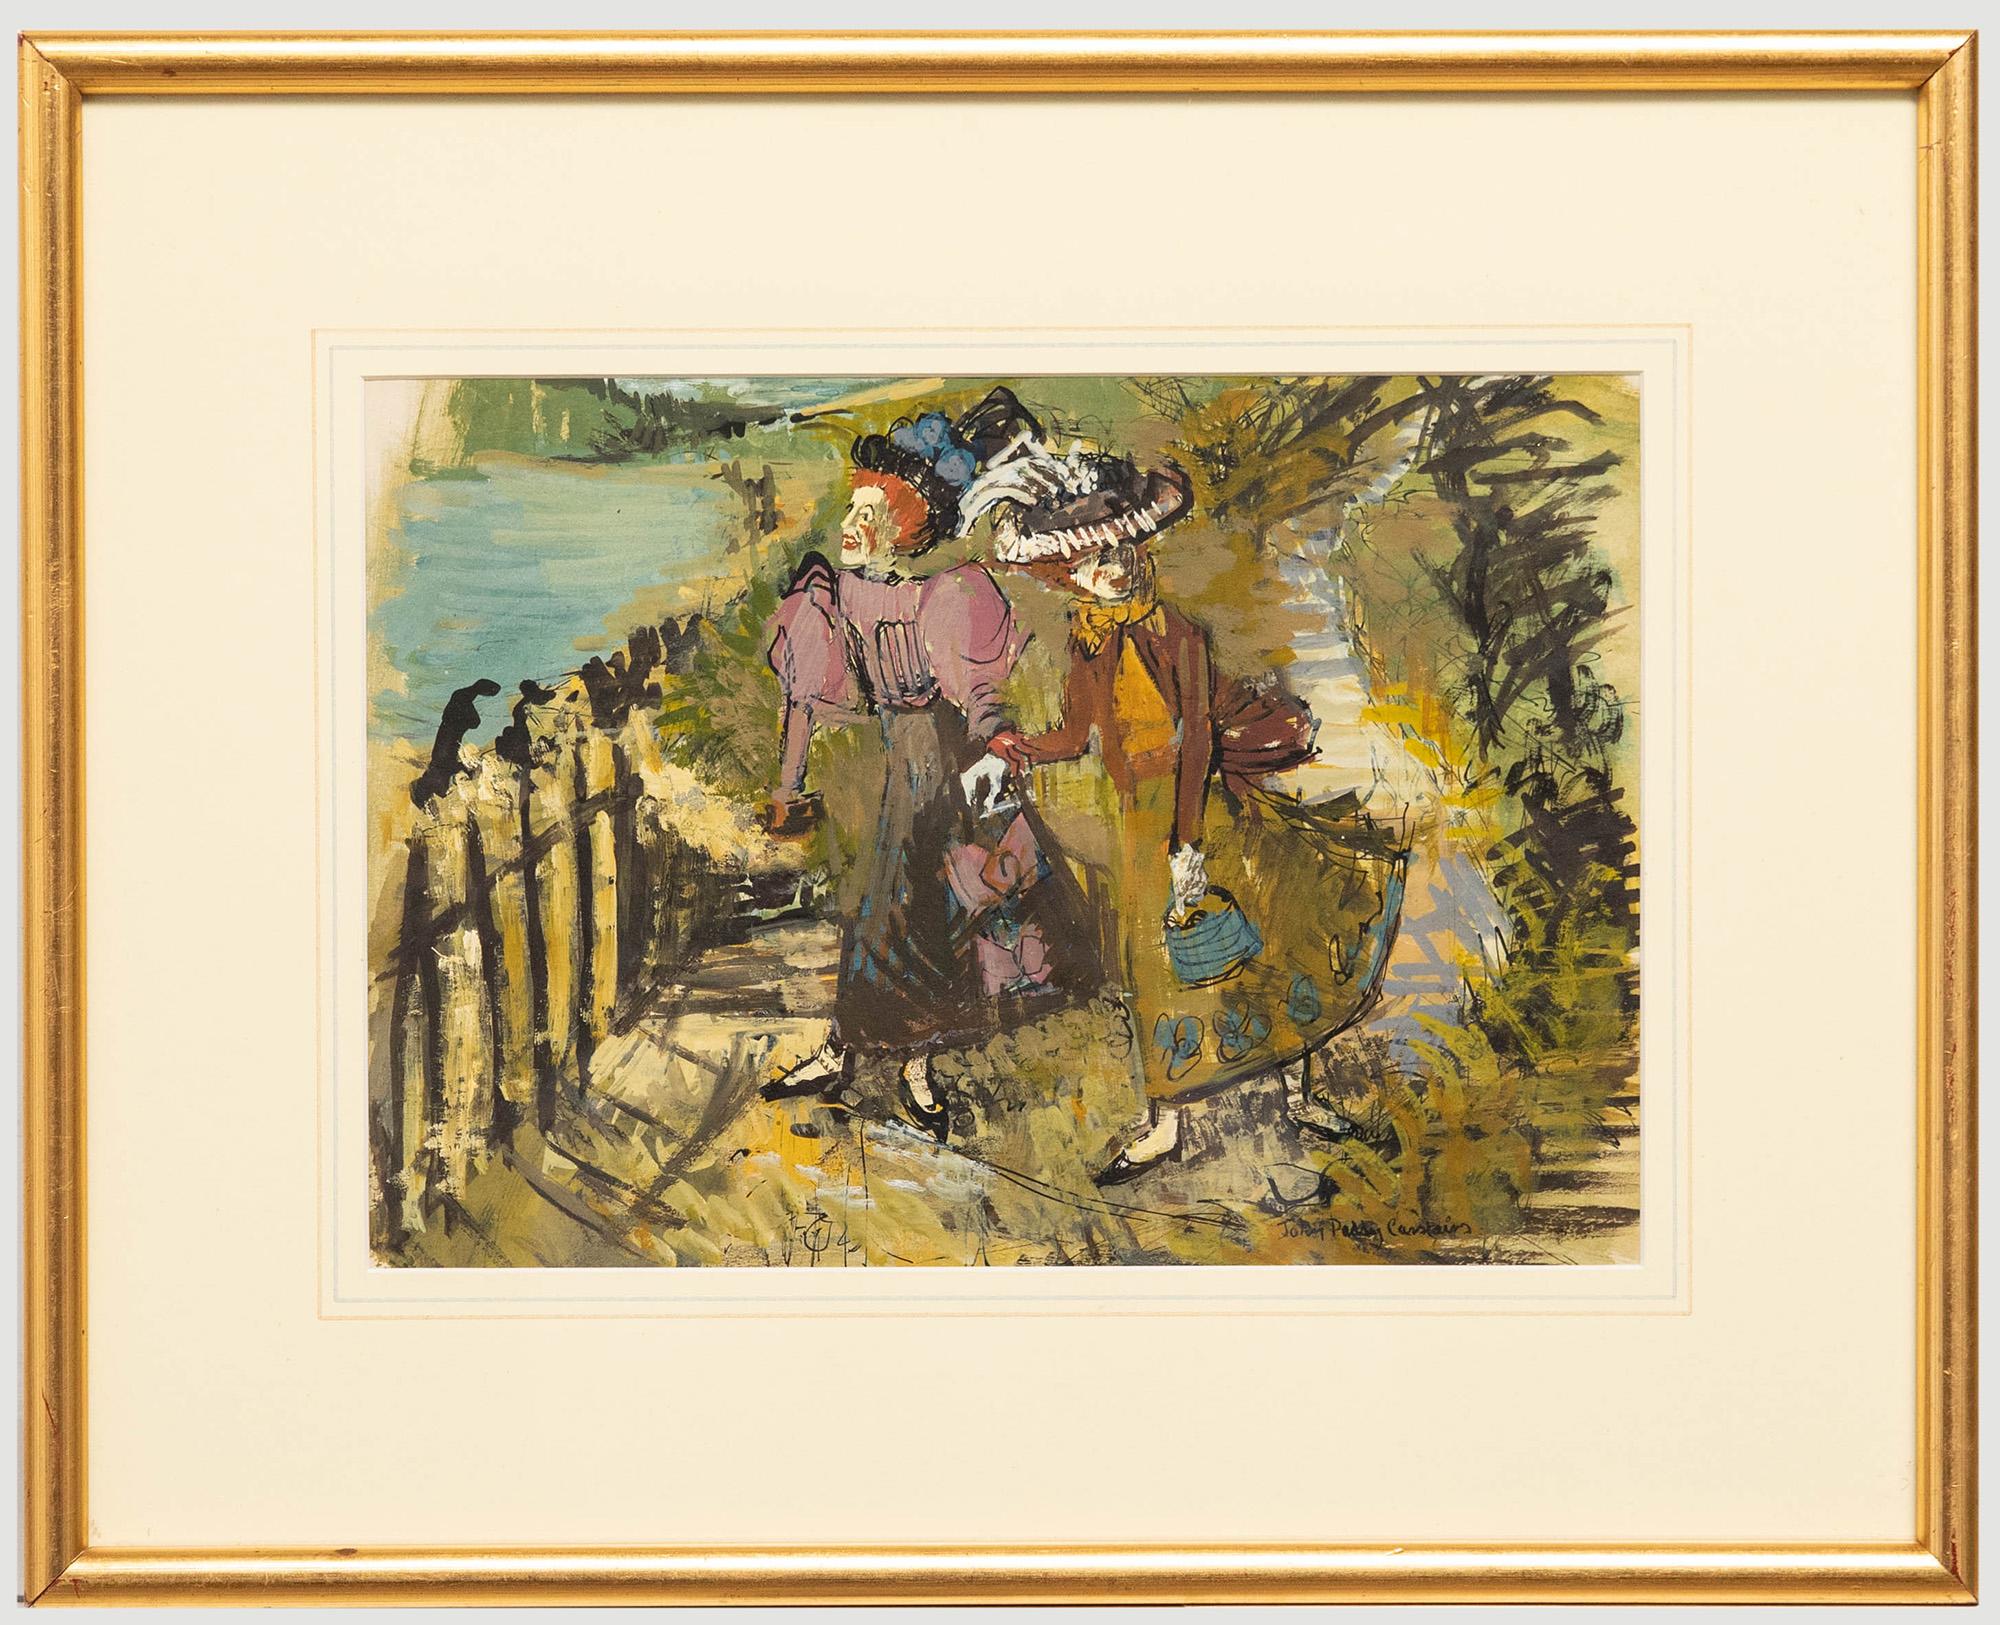 Unknown Figurative Art - John Paddy Carstairs (1916-1970) - Framed Gouache, Strolling the Towpath